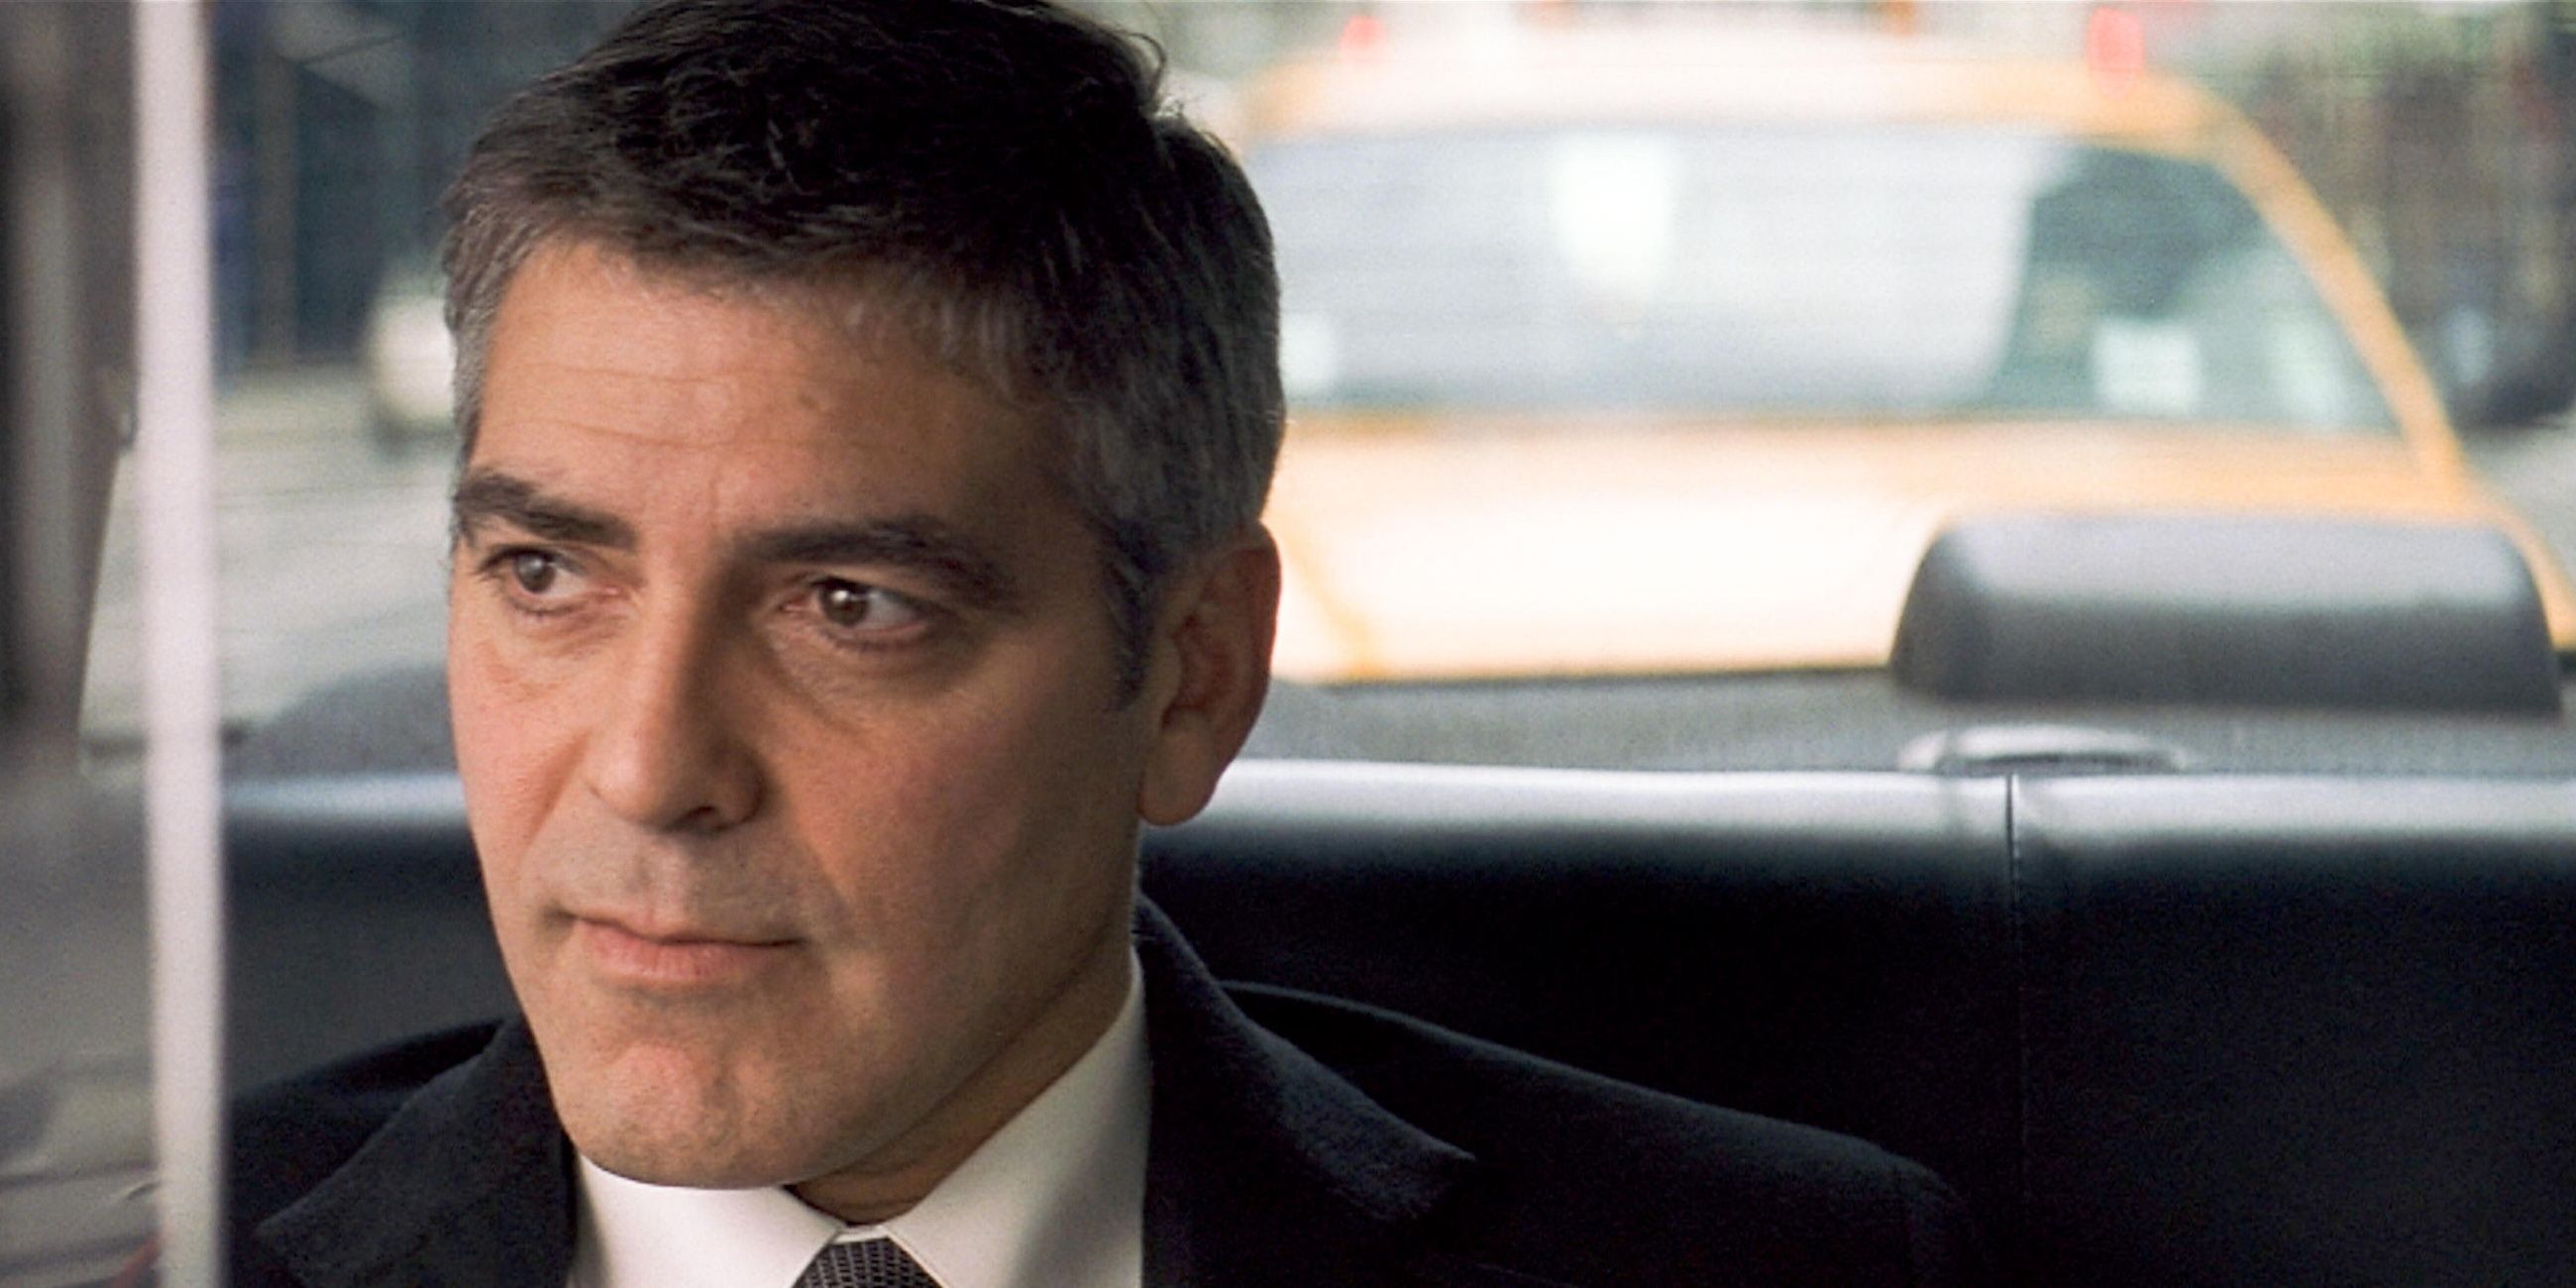 George Clooney His 5 Smartest Characters (& 5 Dumbest)